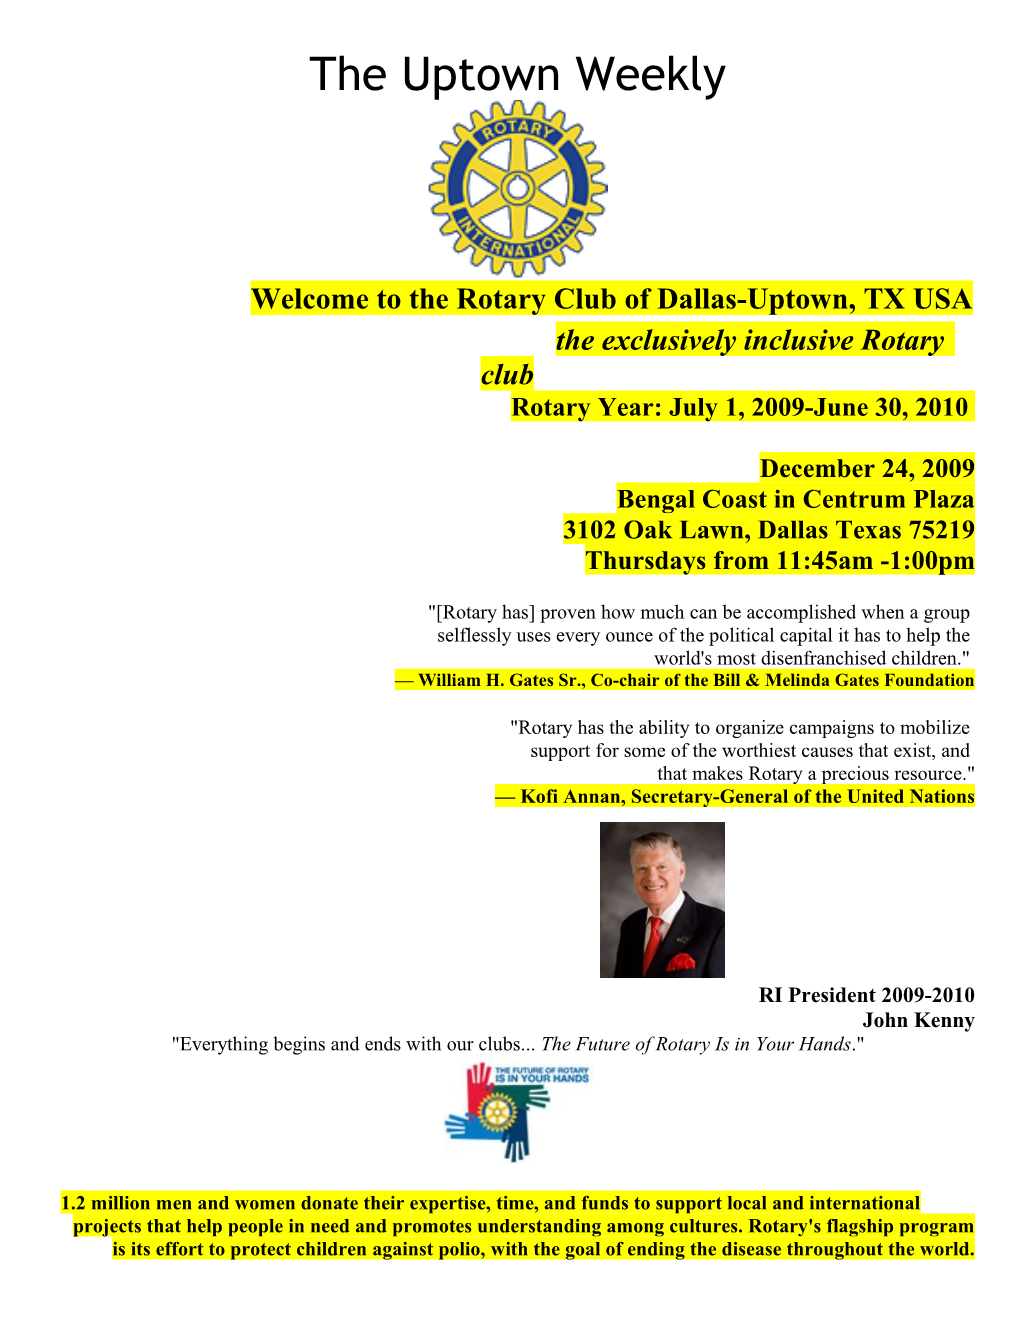 Welcome to the Rotary Club of Dallas-Uptown, TX USA s5